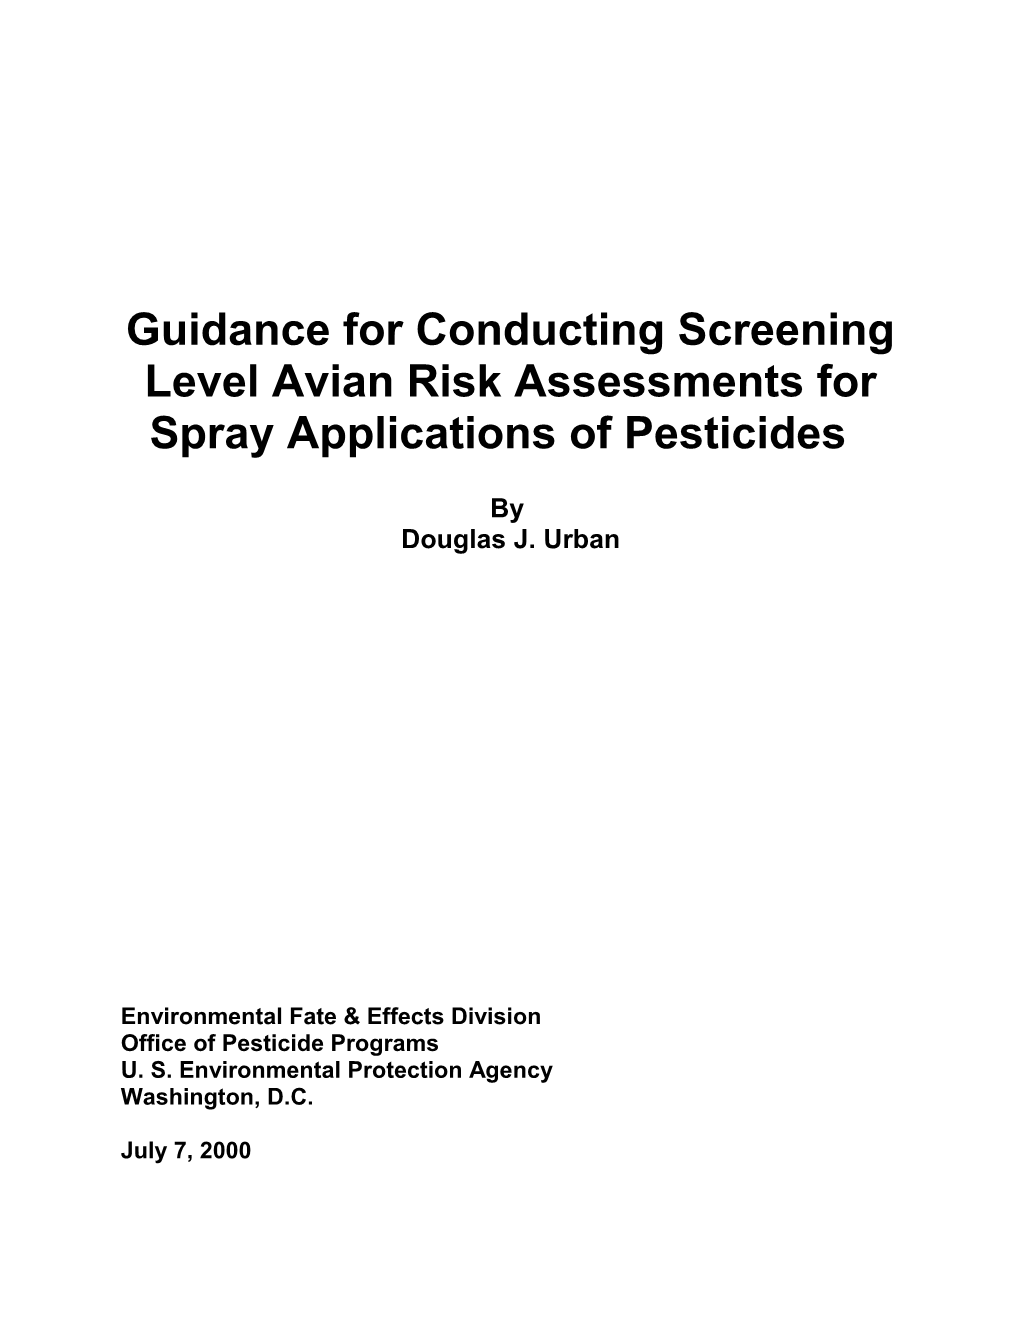 Guidance for Conducting Screening Level Avian Risk Assessments for Spray Applications Of